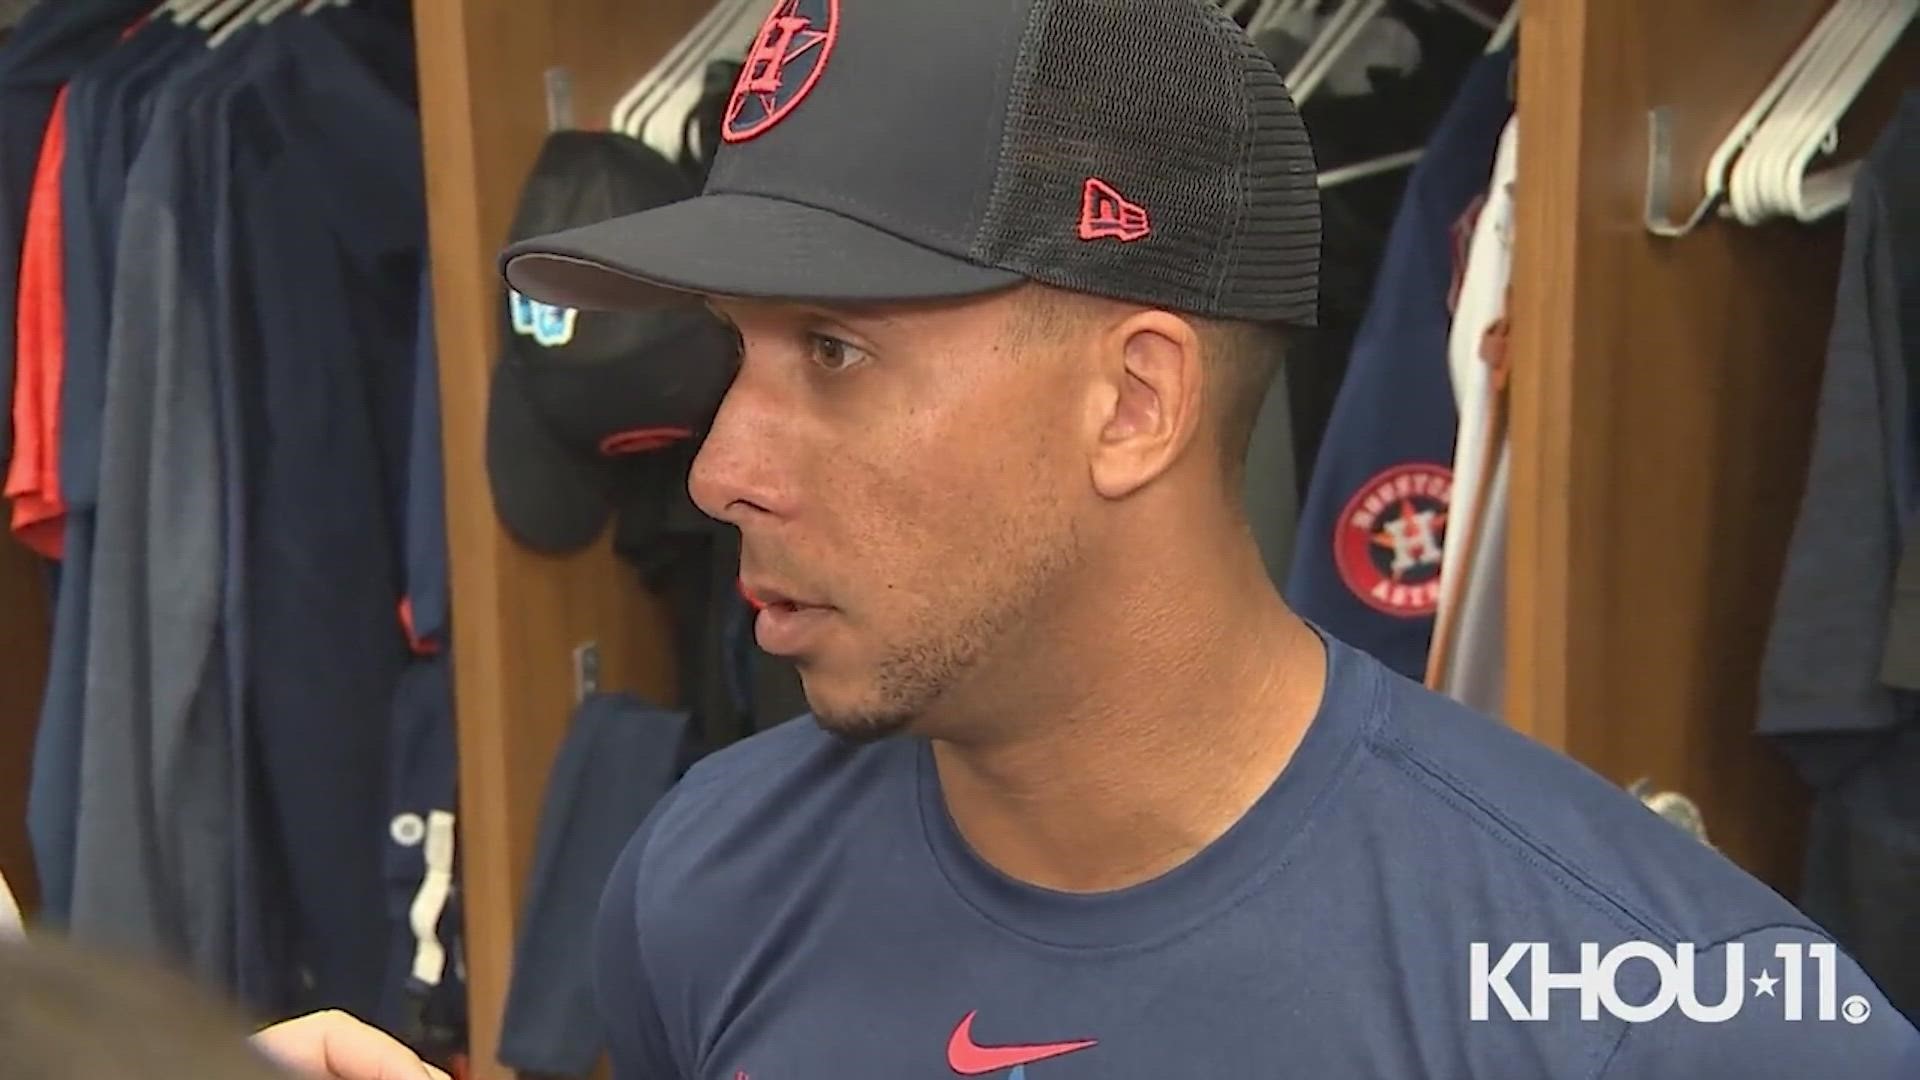 The 35-year-old Brantley had season-ending surgery on his shoulder in August.